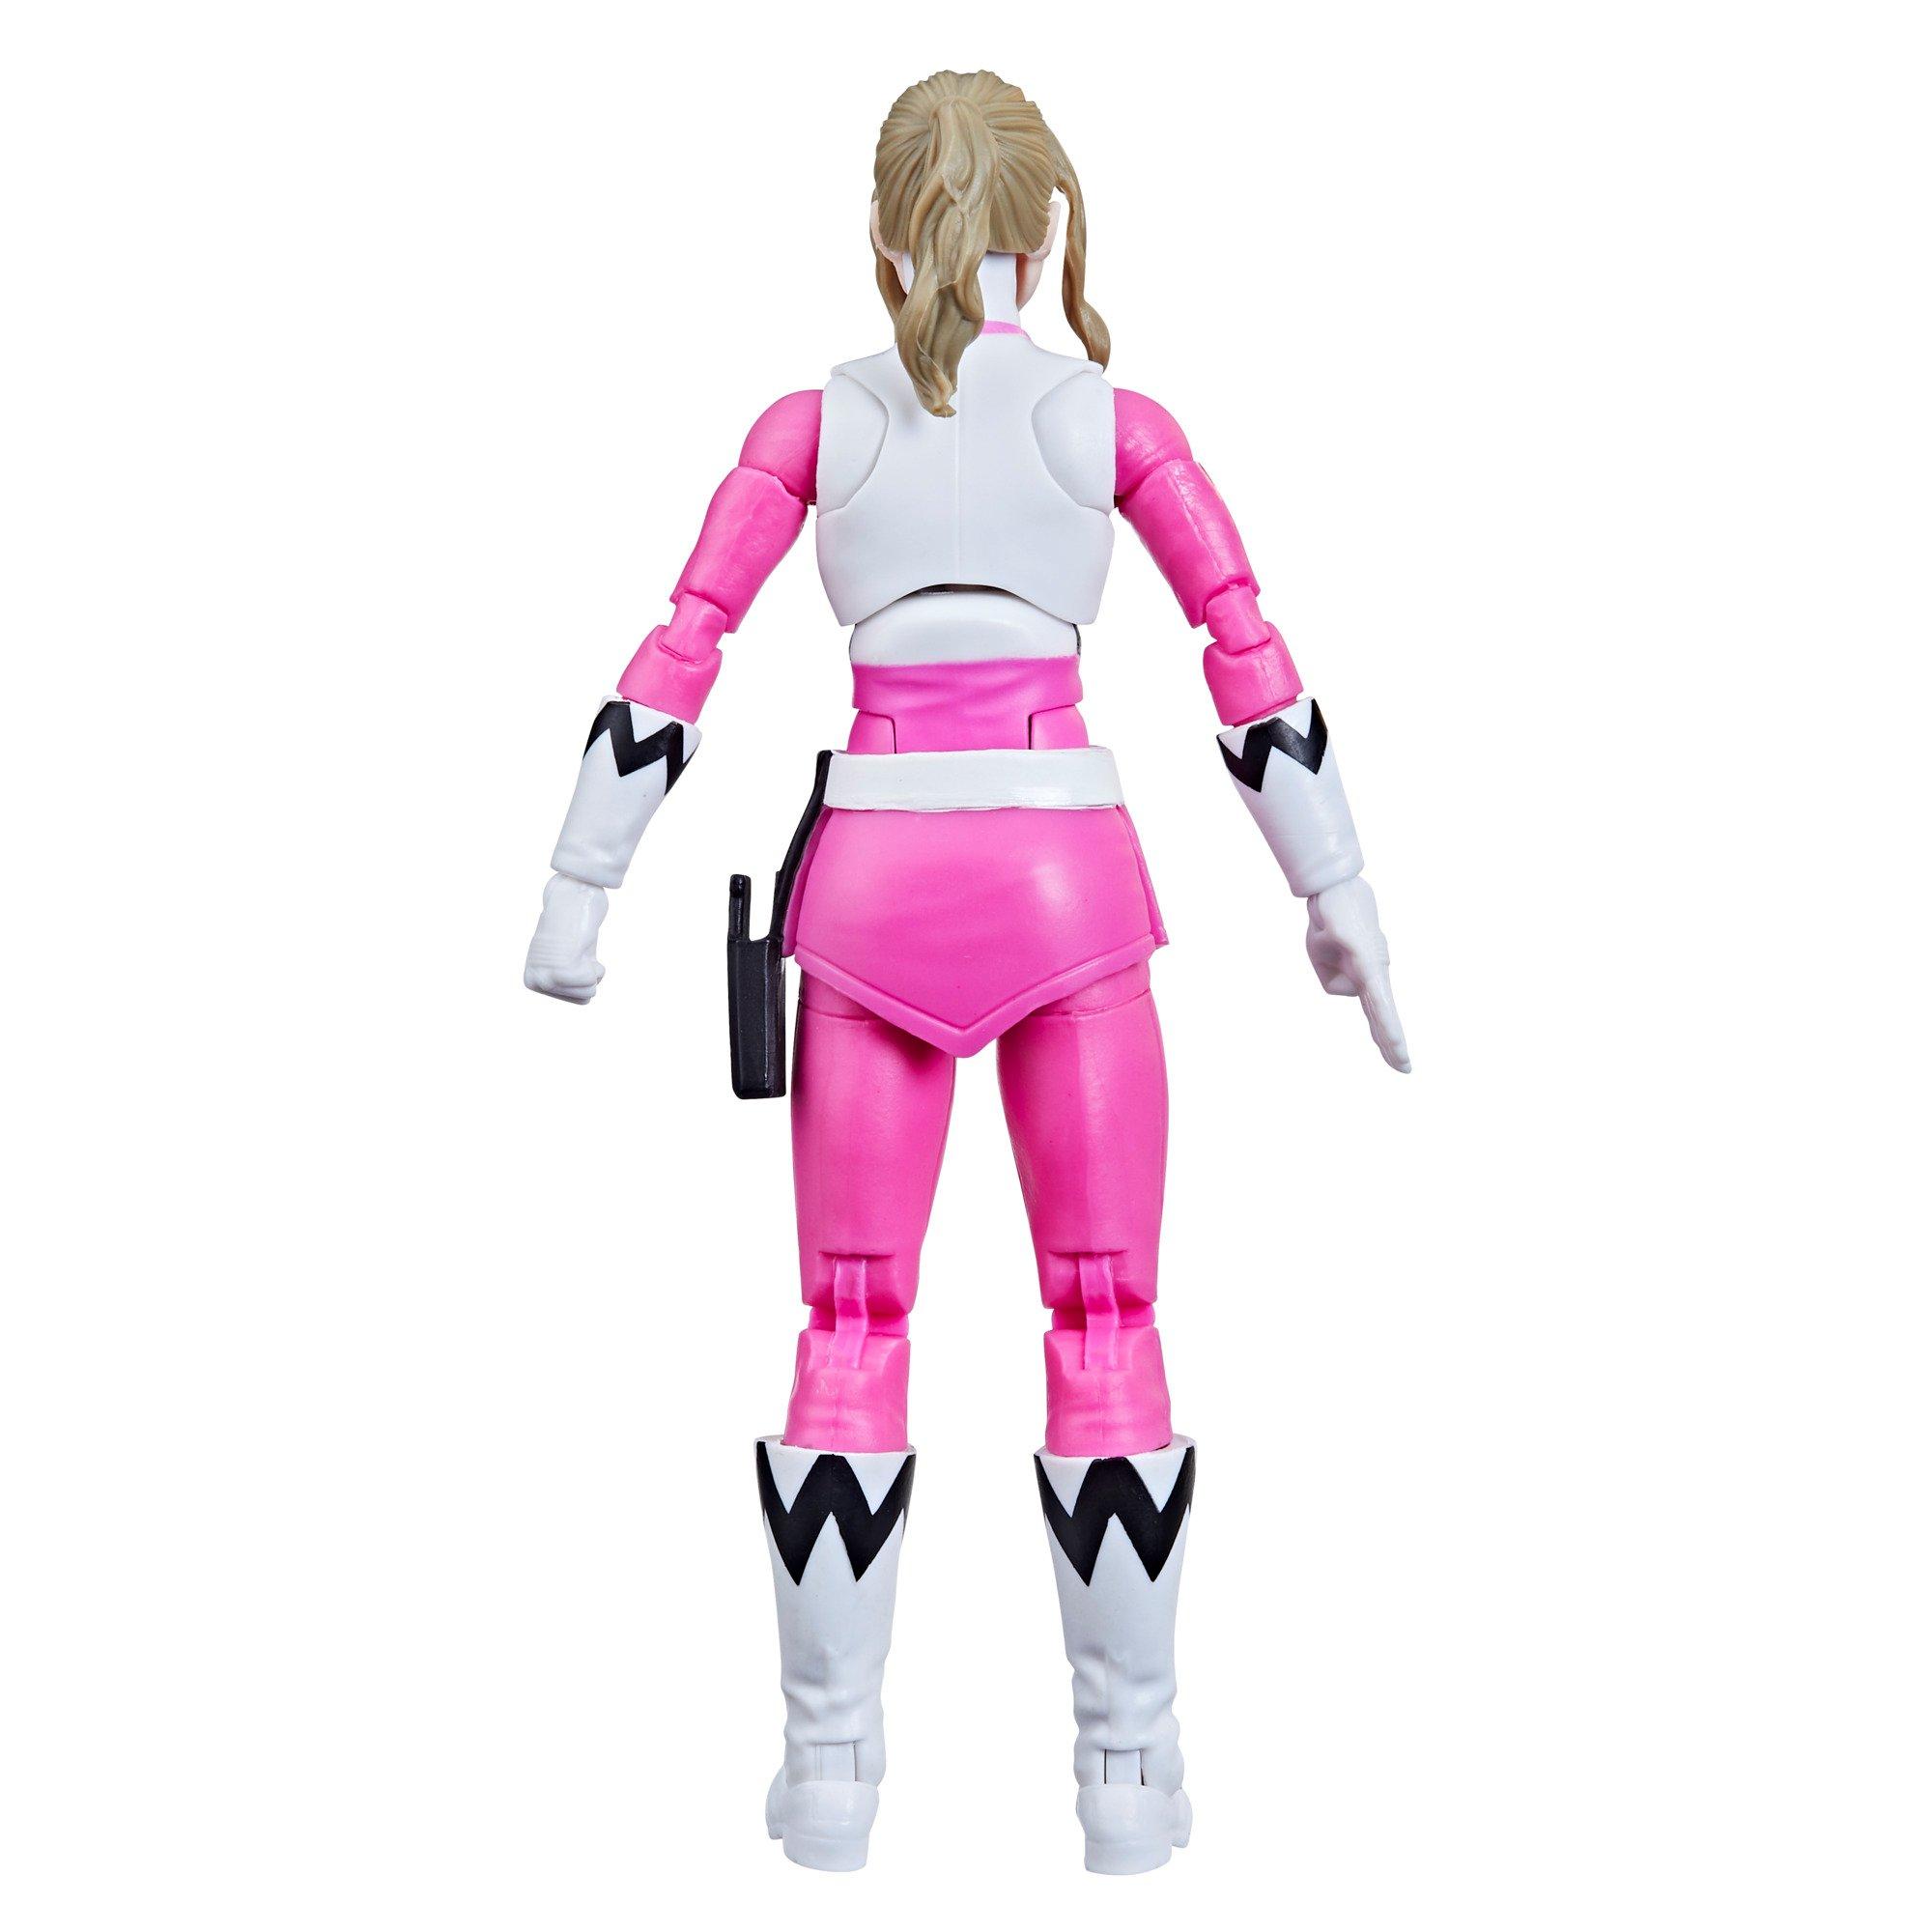 Hasbro Power Rangers Lightning Collection Lost Galaxy Pink Ranger 6-in Action Figure